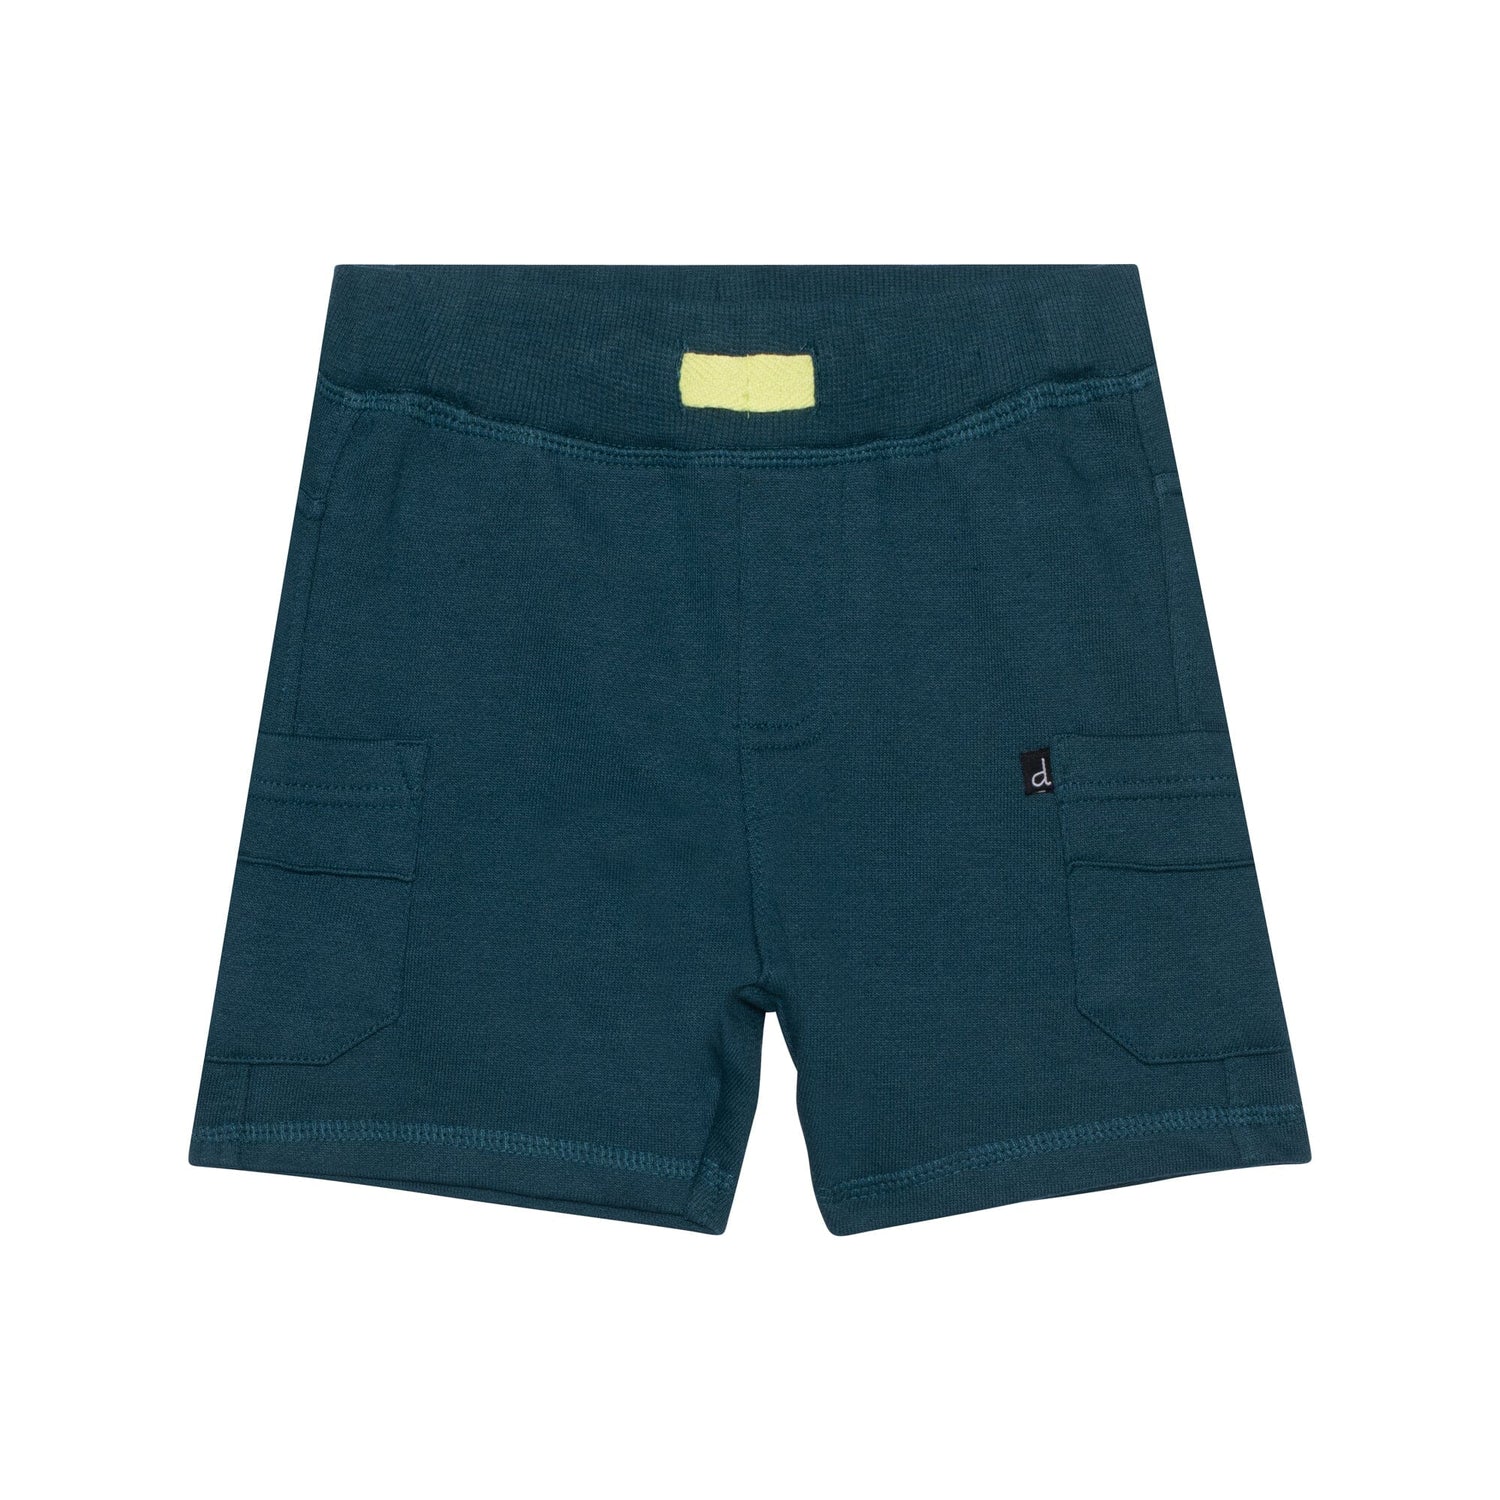 French Terry Short Dark Teal With Pockets - E30T25_379